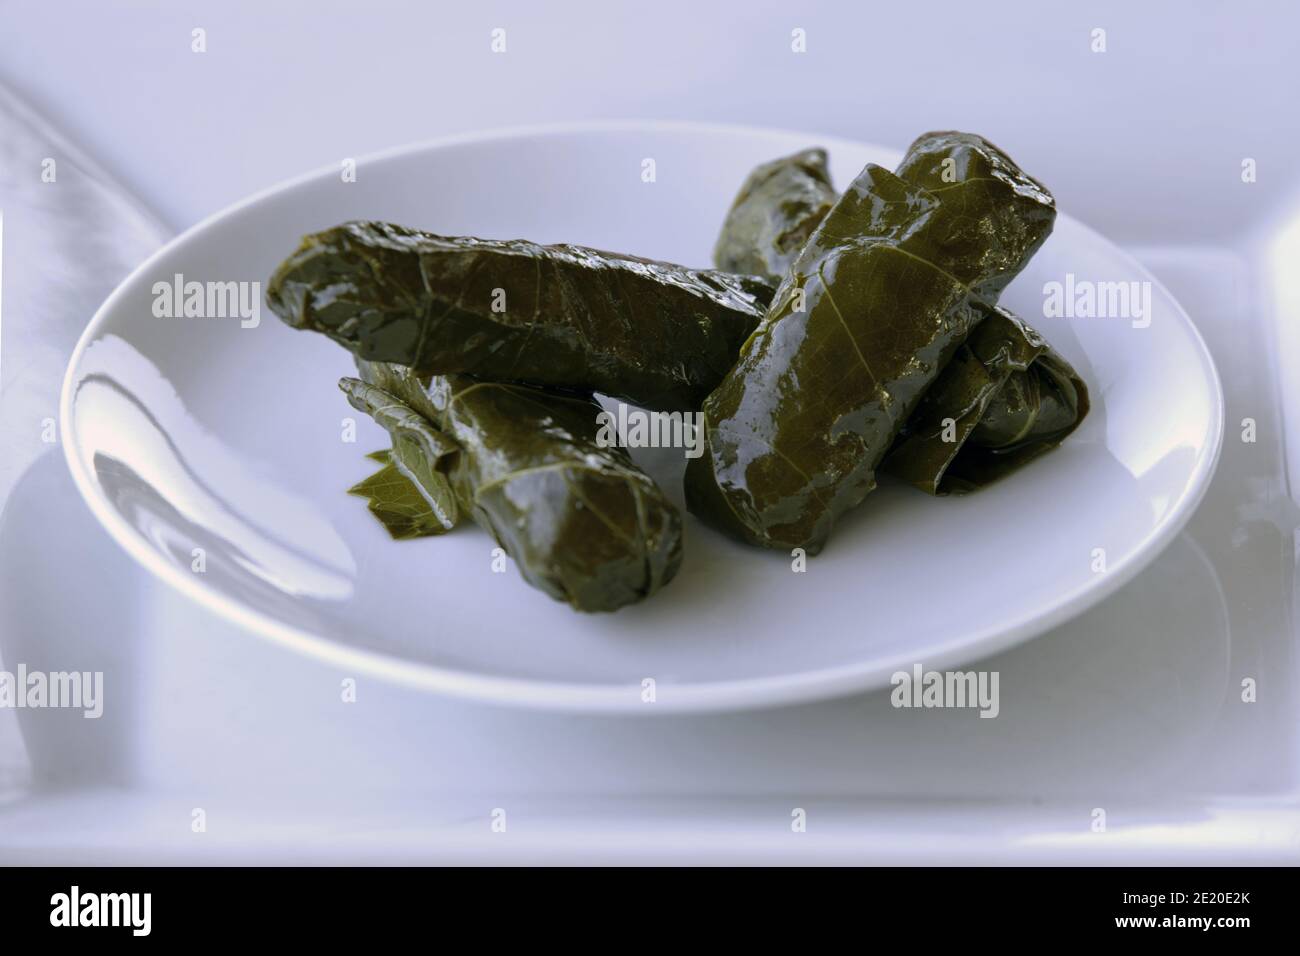 Grape Sarma (Dolma), stuffed grape leaves with rice and meat on white plate, selective focus. Stock Photo